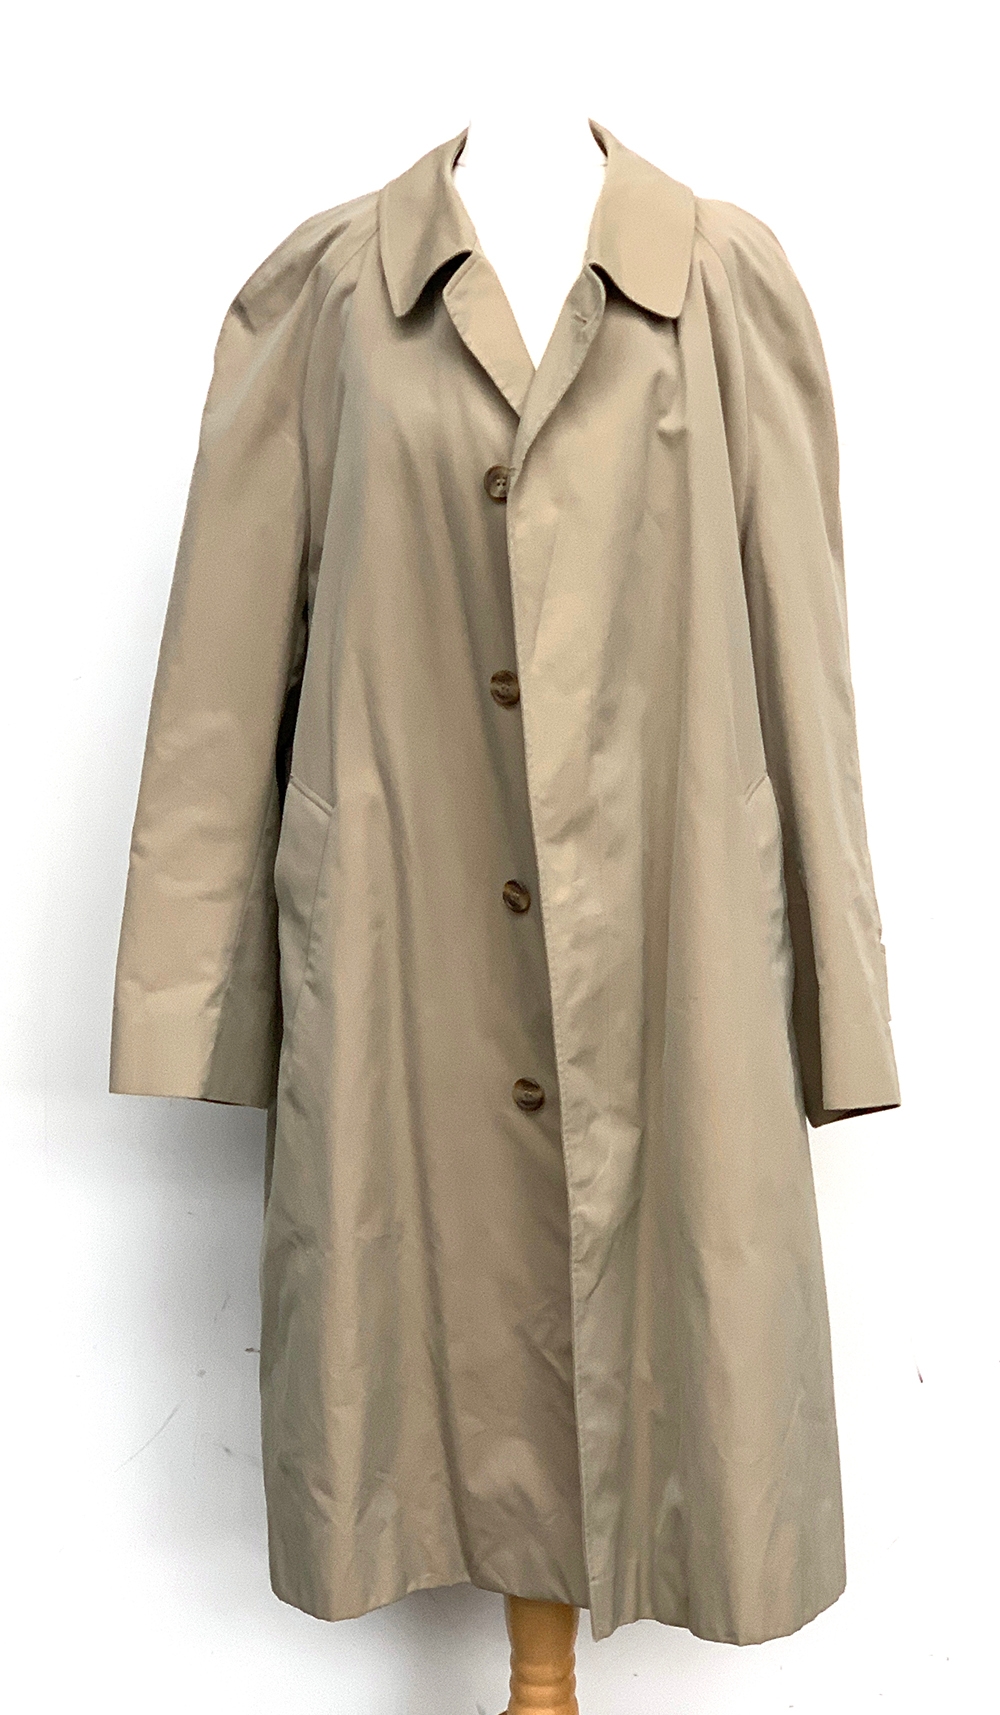 An Aquascutum rain mackintosh with cheque lining and further removeable wool lining, new without